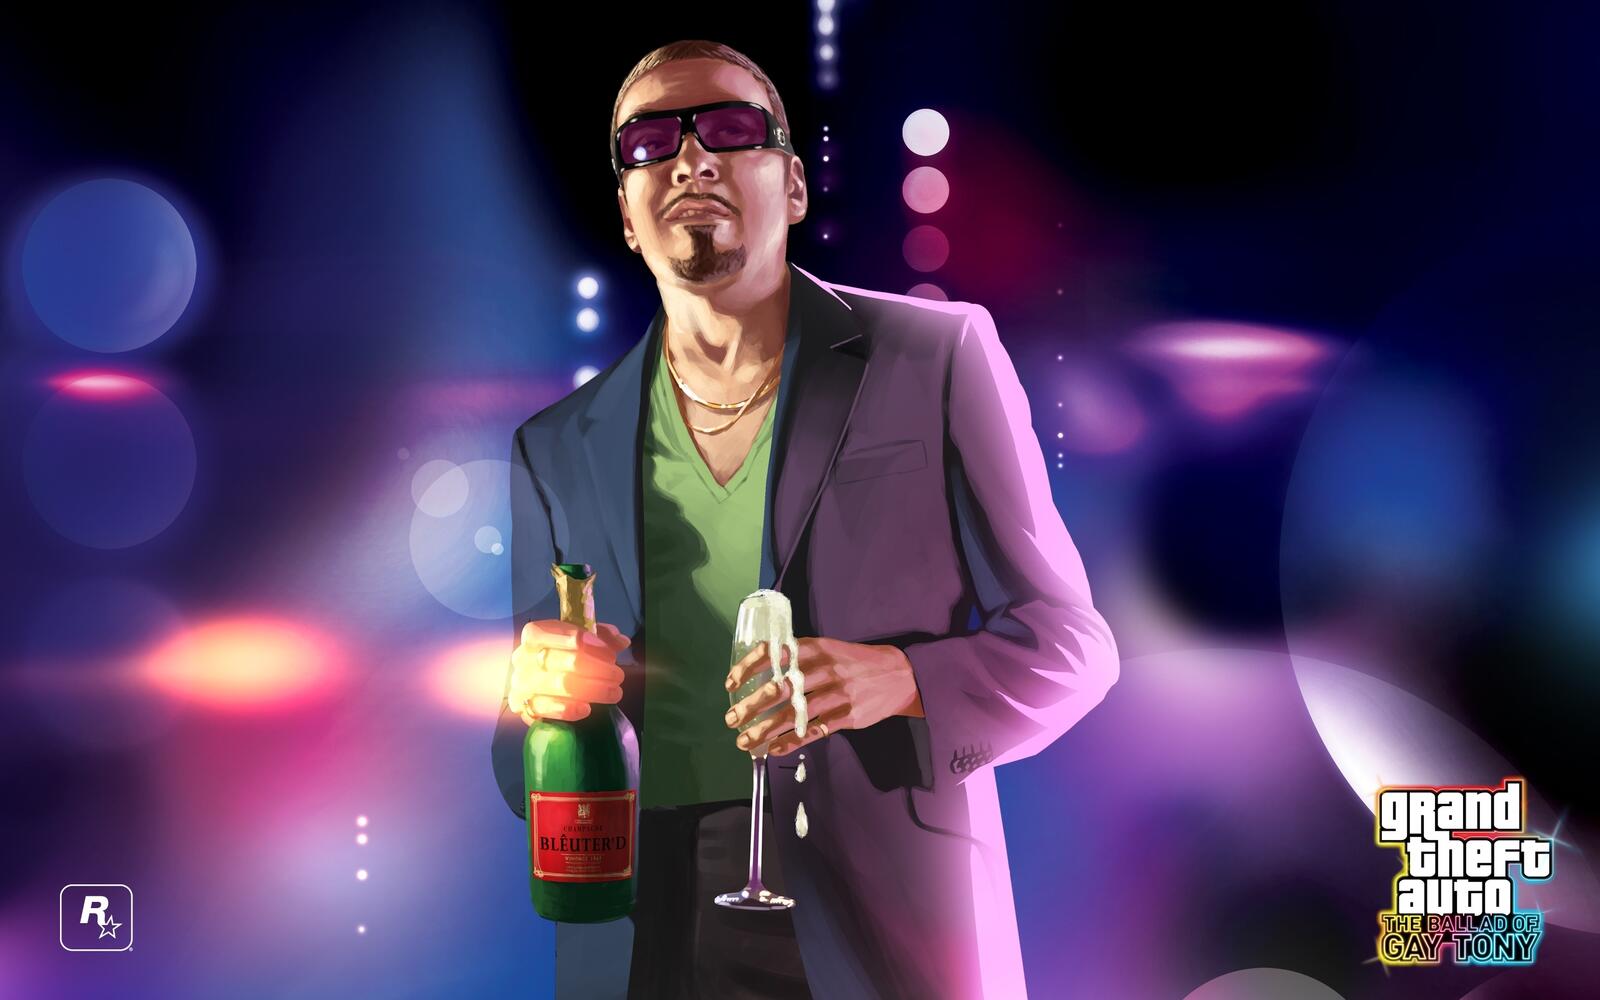 Wallpapers champagne gta 4 the ballad of gay tony grand theft auto 4 the ballad of gay tony on the desktop